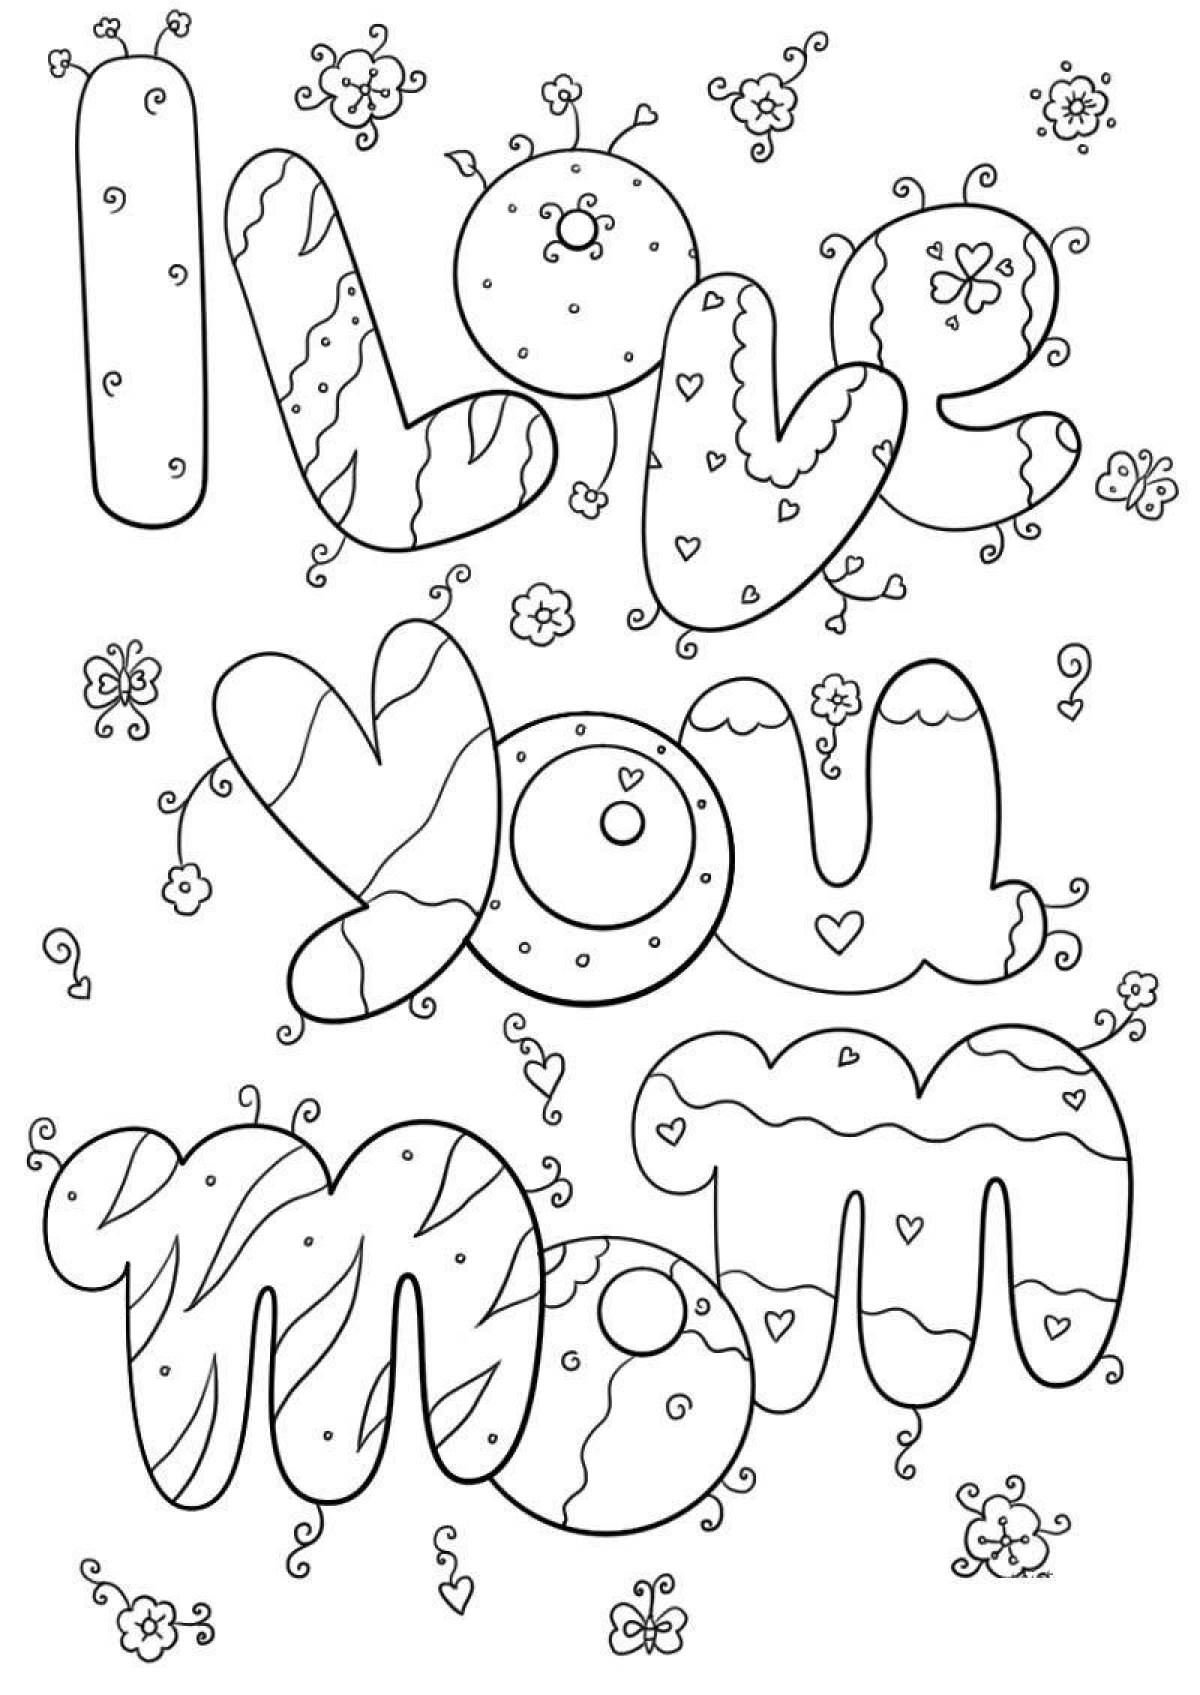 Blooming i love you dad coloring page